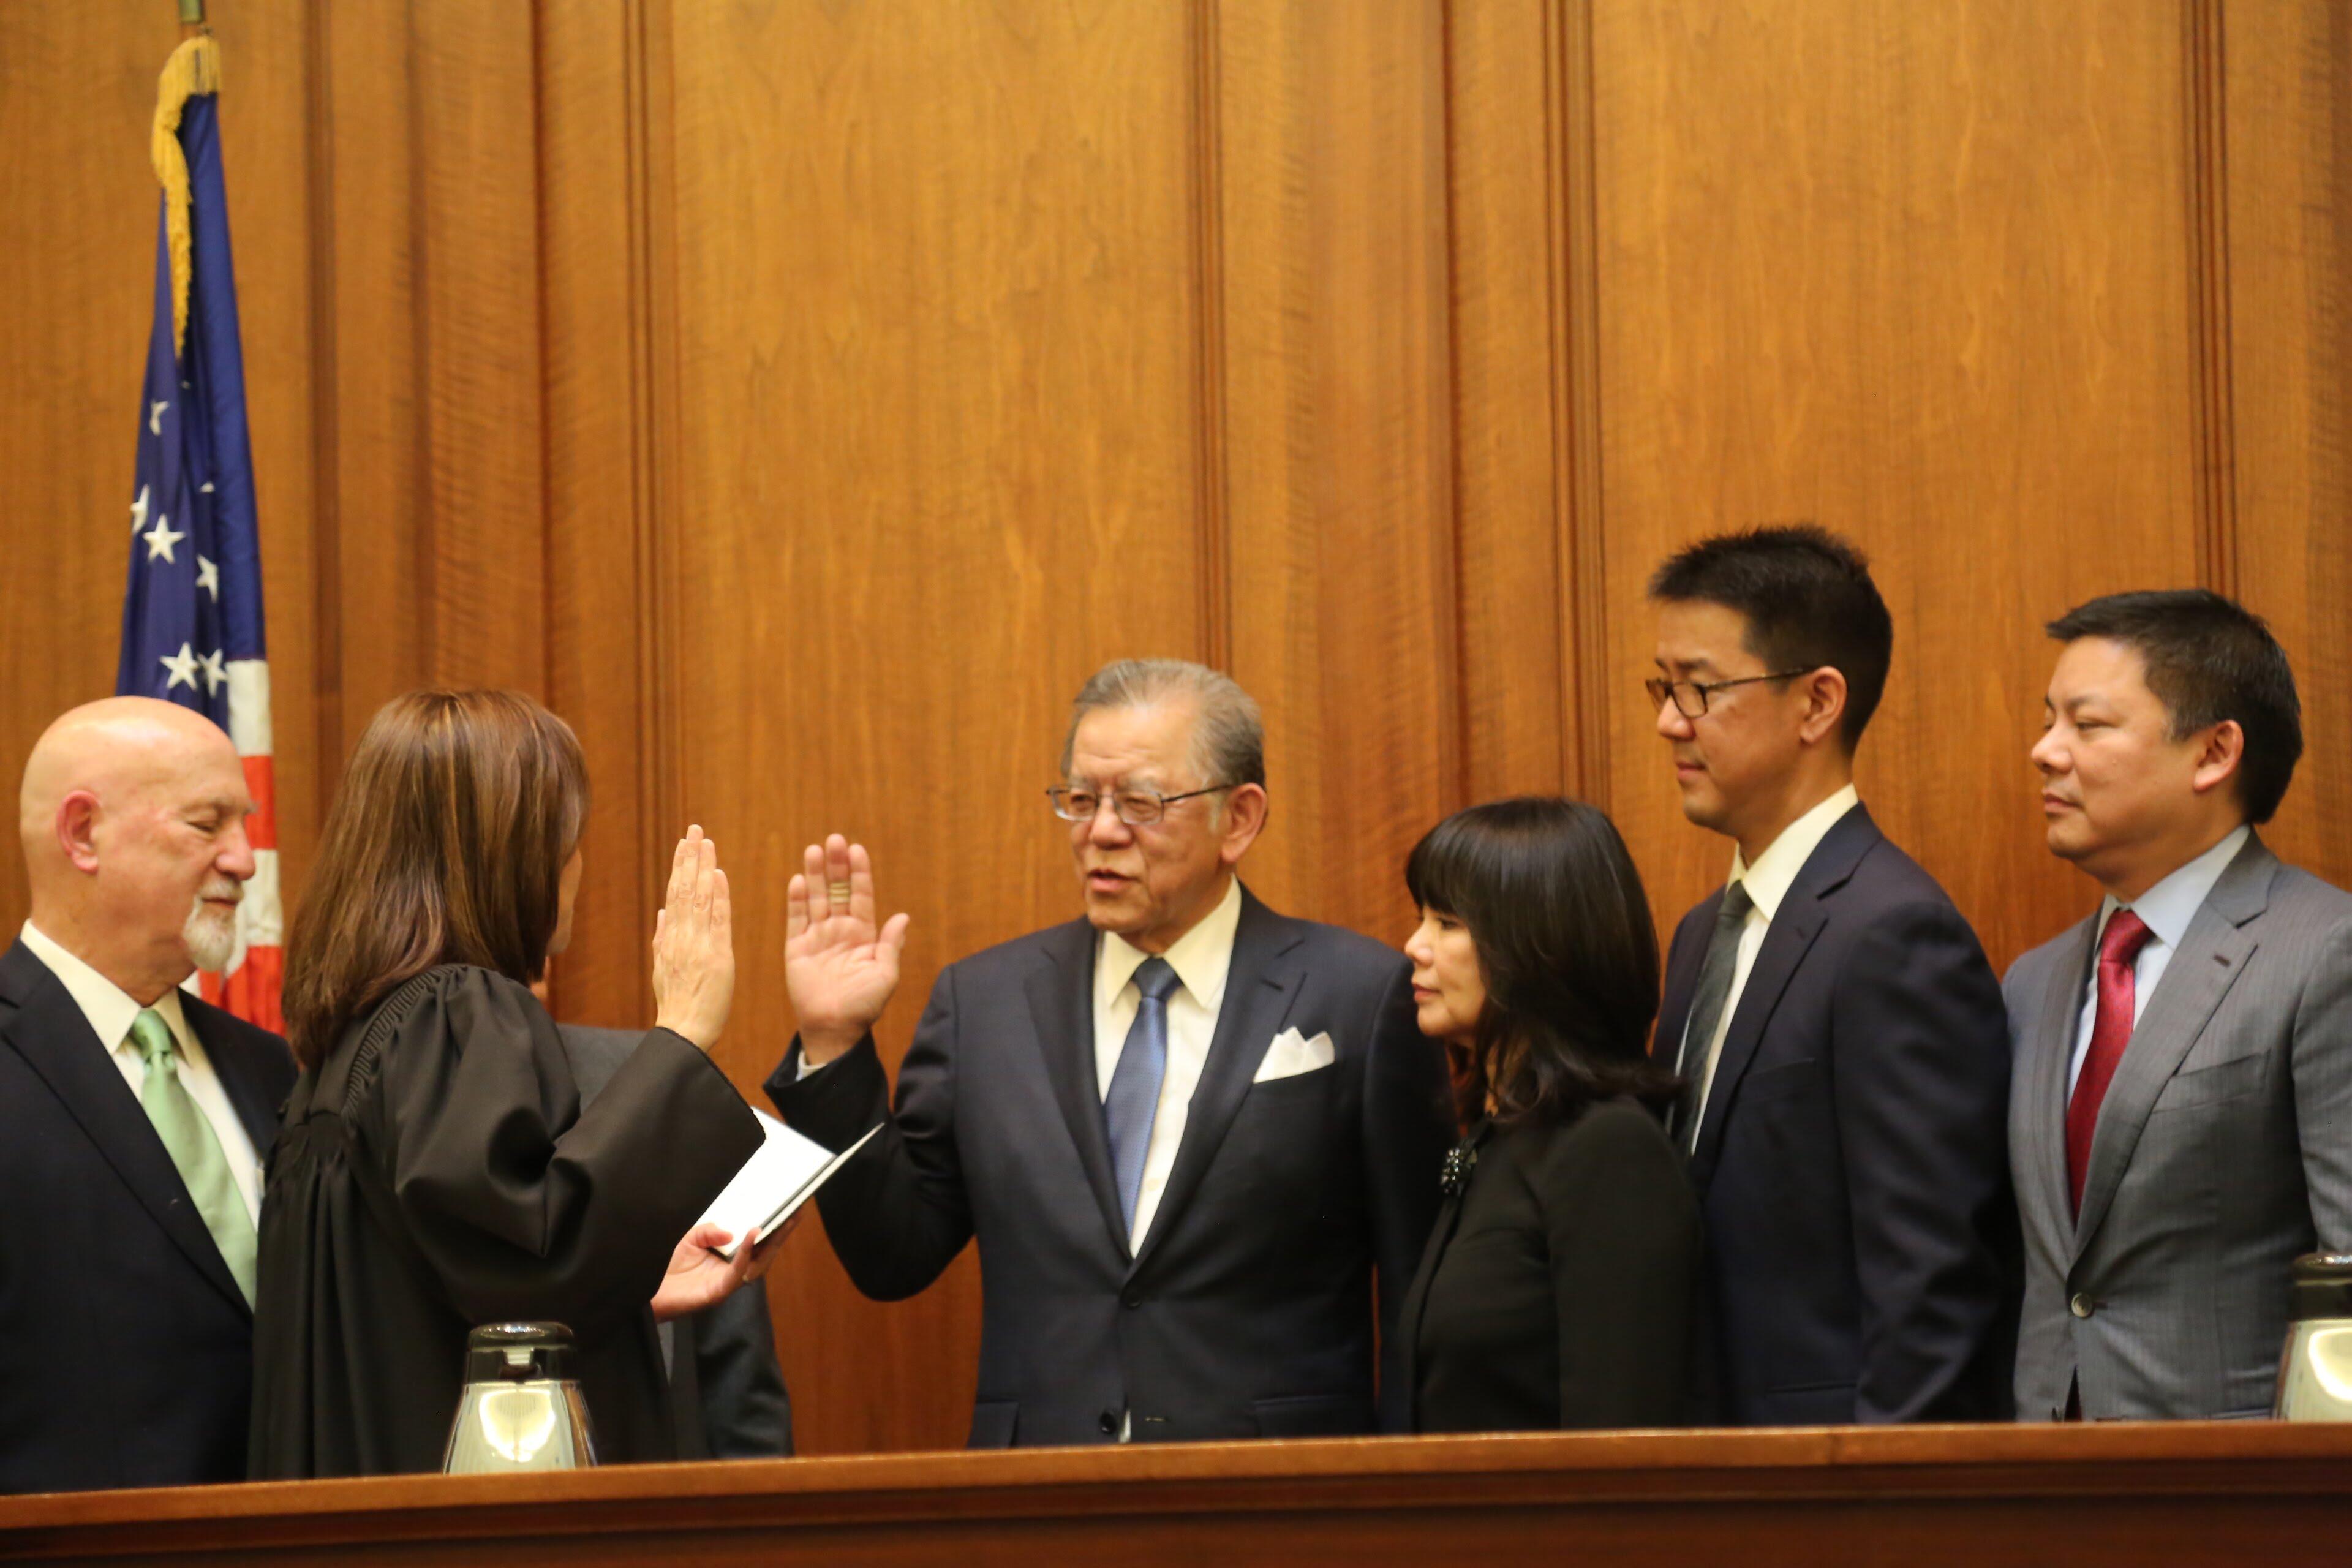 Justice Elwood Lui is sworn in by Chief Justice Tani G. Cantil-Sakauye.